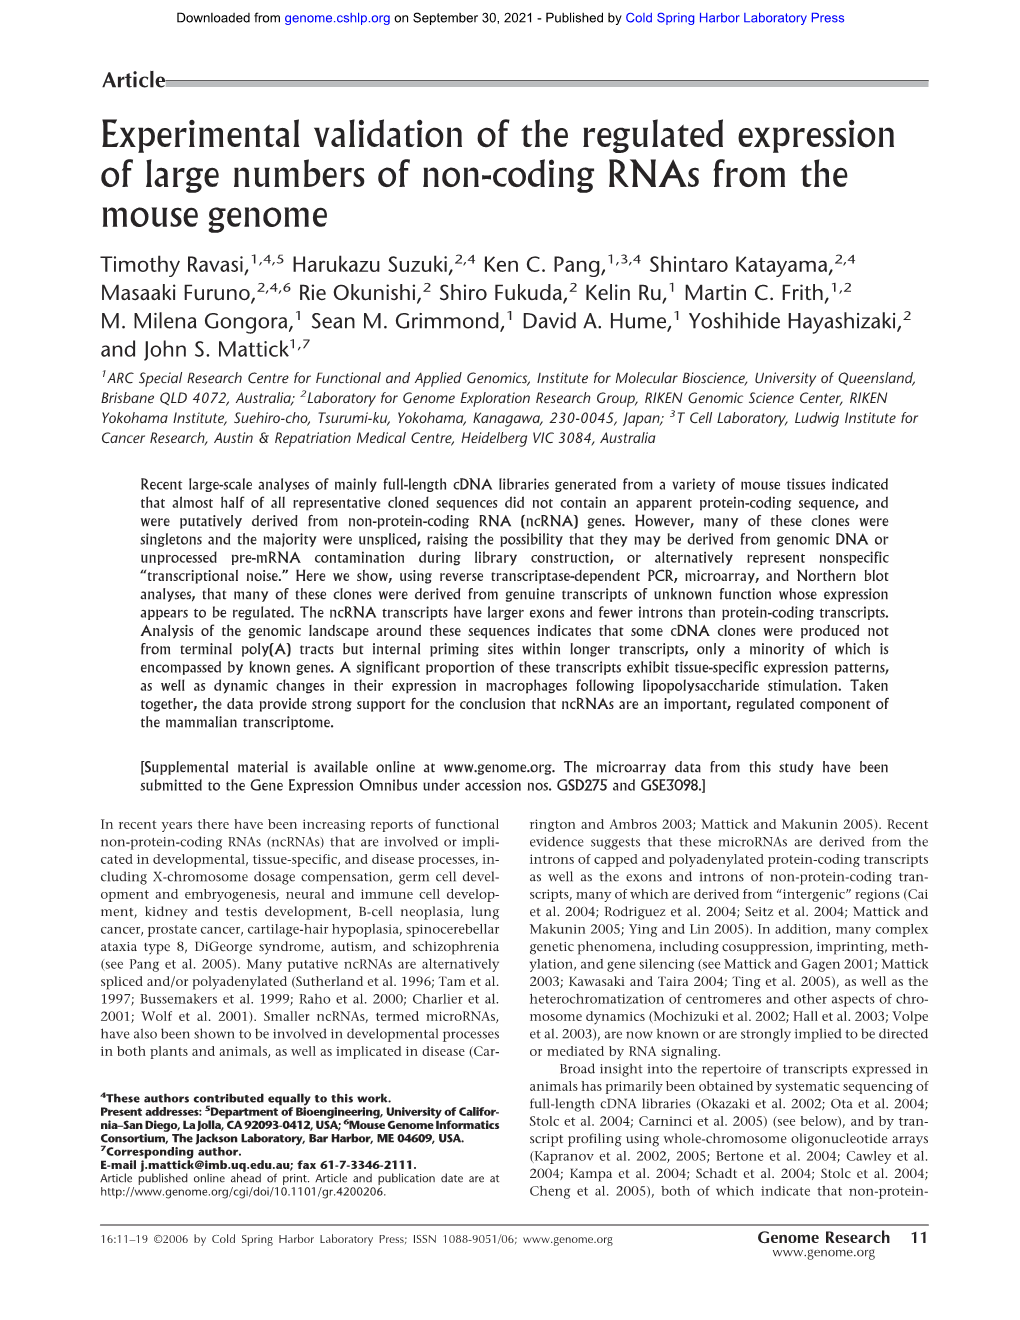 Experimental Validation of the Regulated Expression of Large Numbers of Non-Coding Rnas from the Mouse Genome